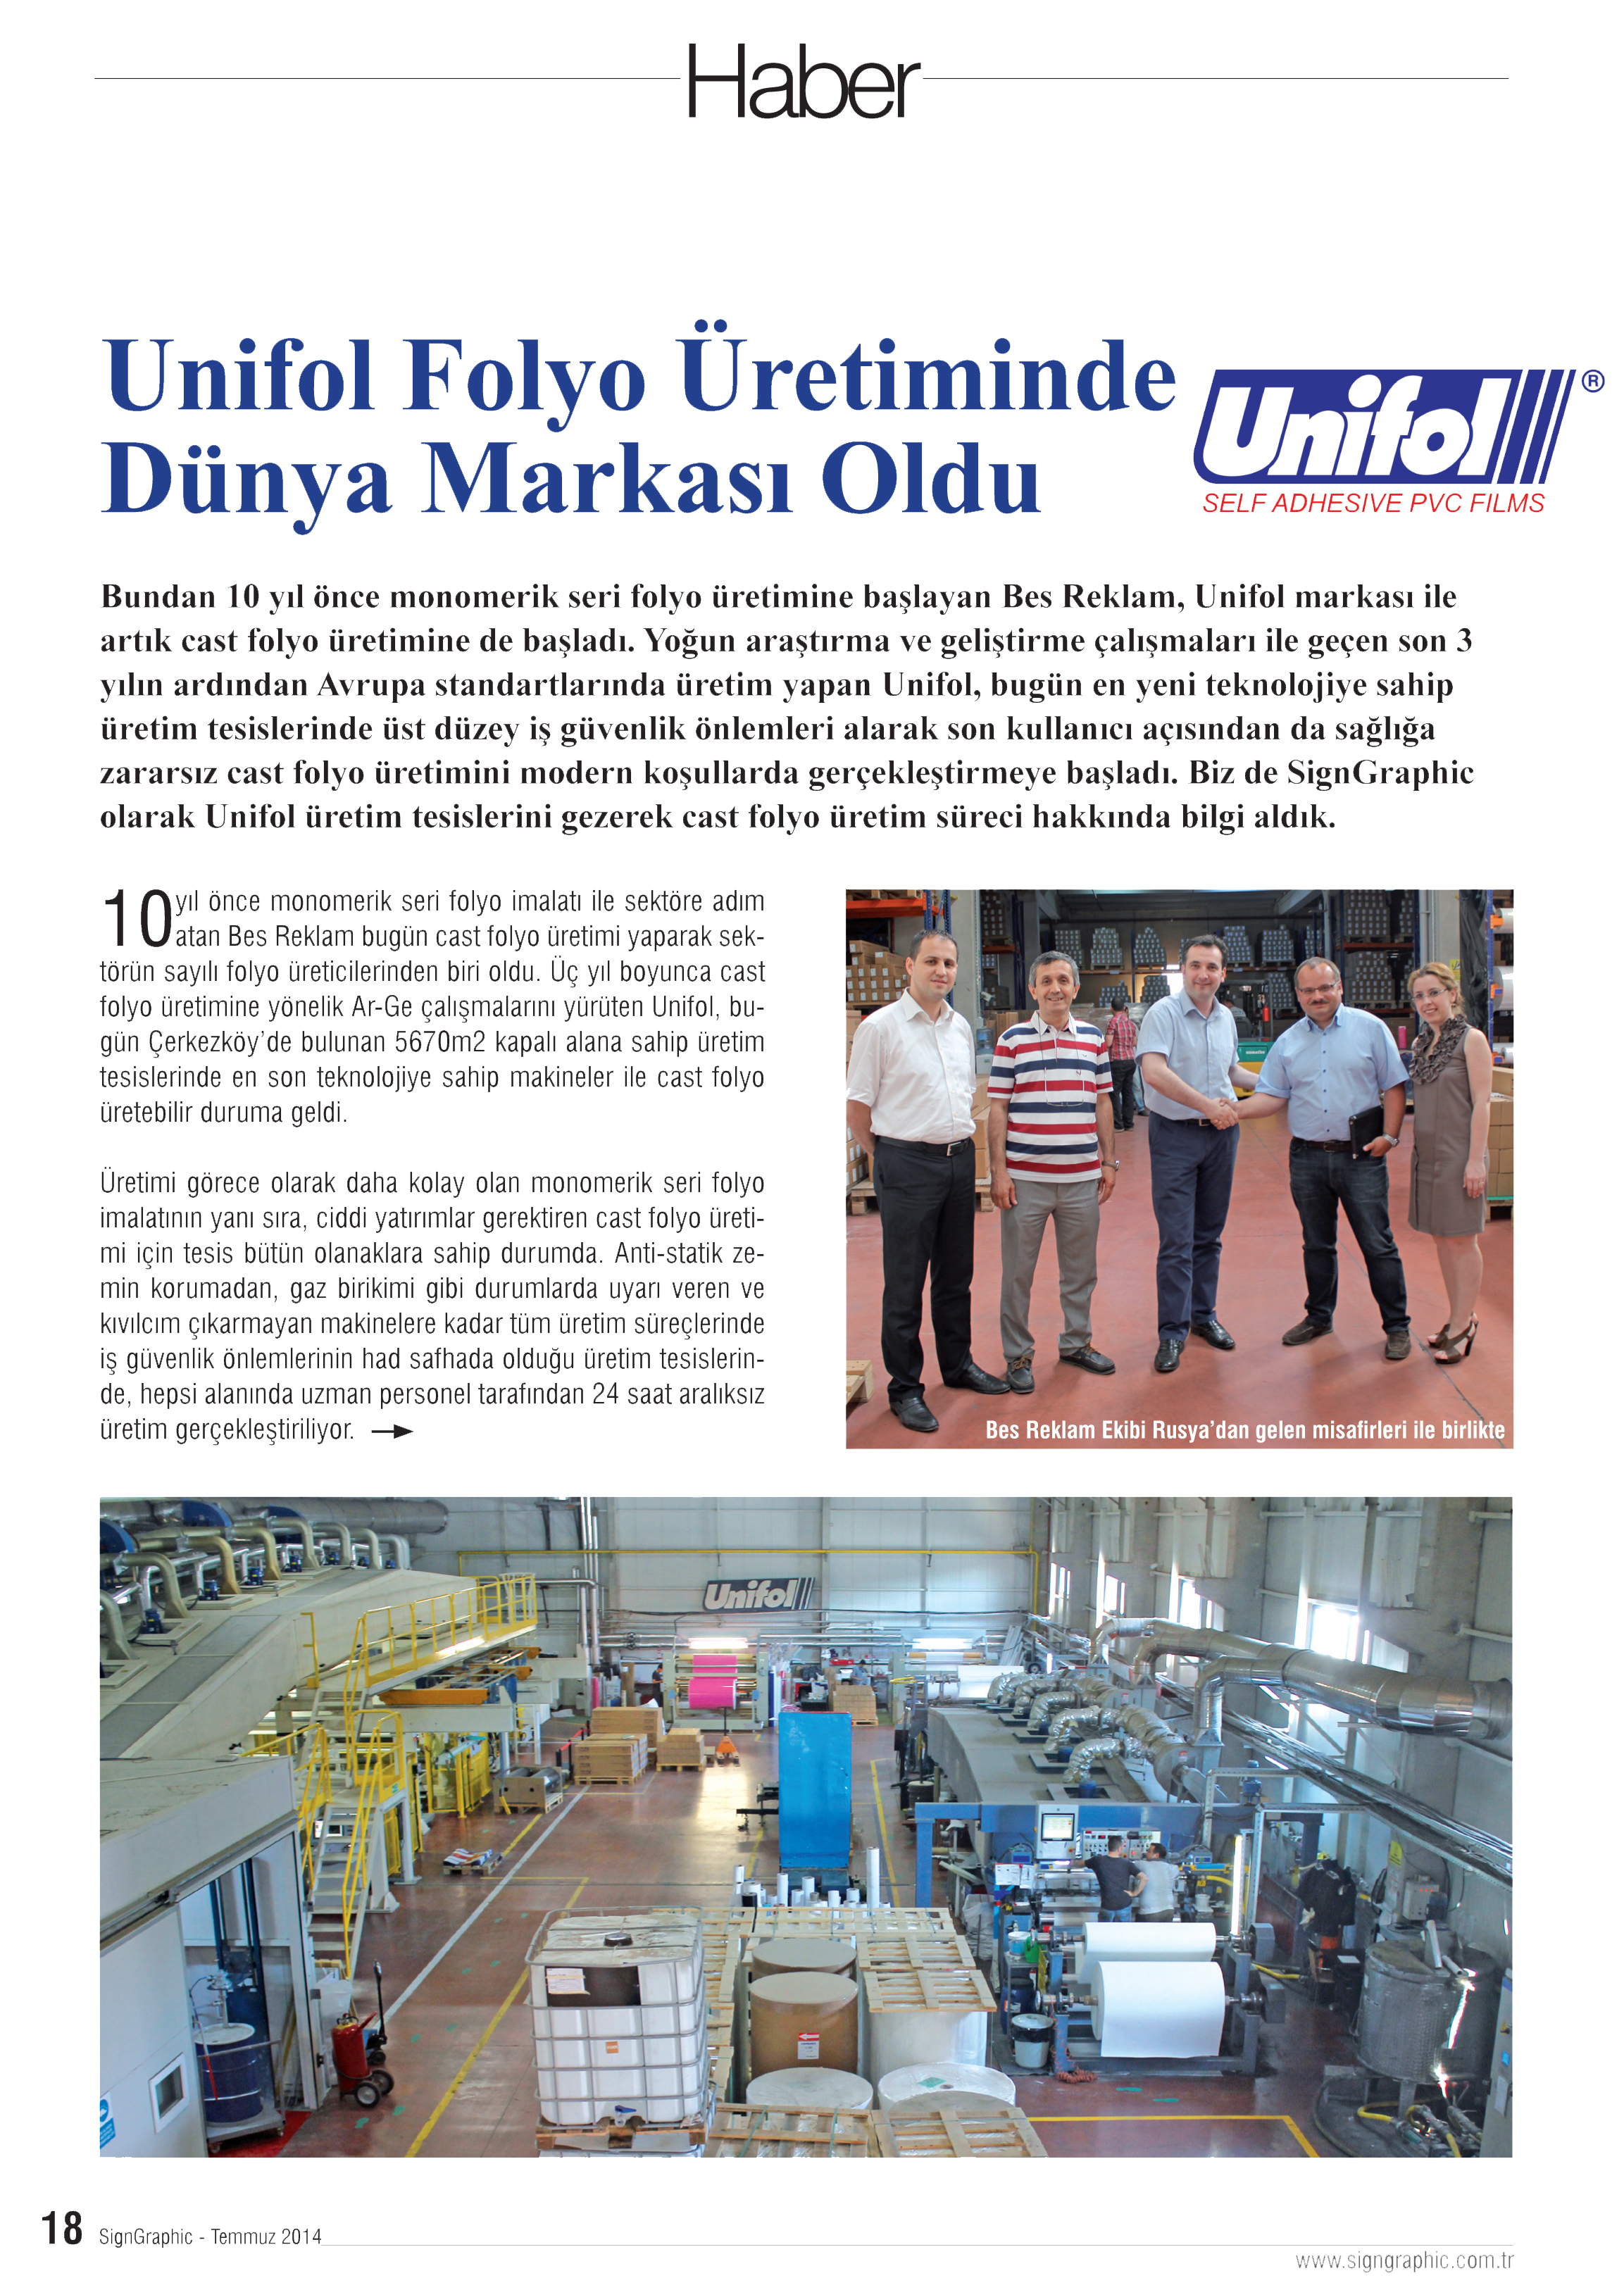 Unifol became a well known brand in the World - 1